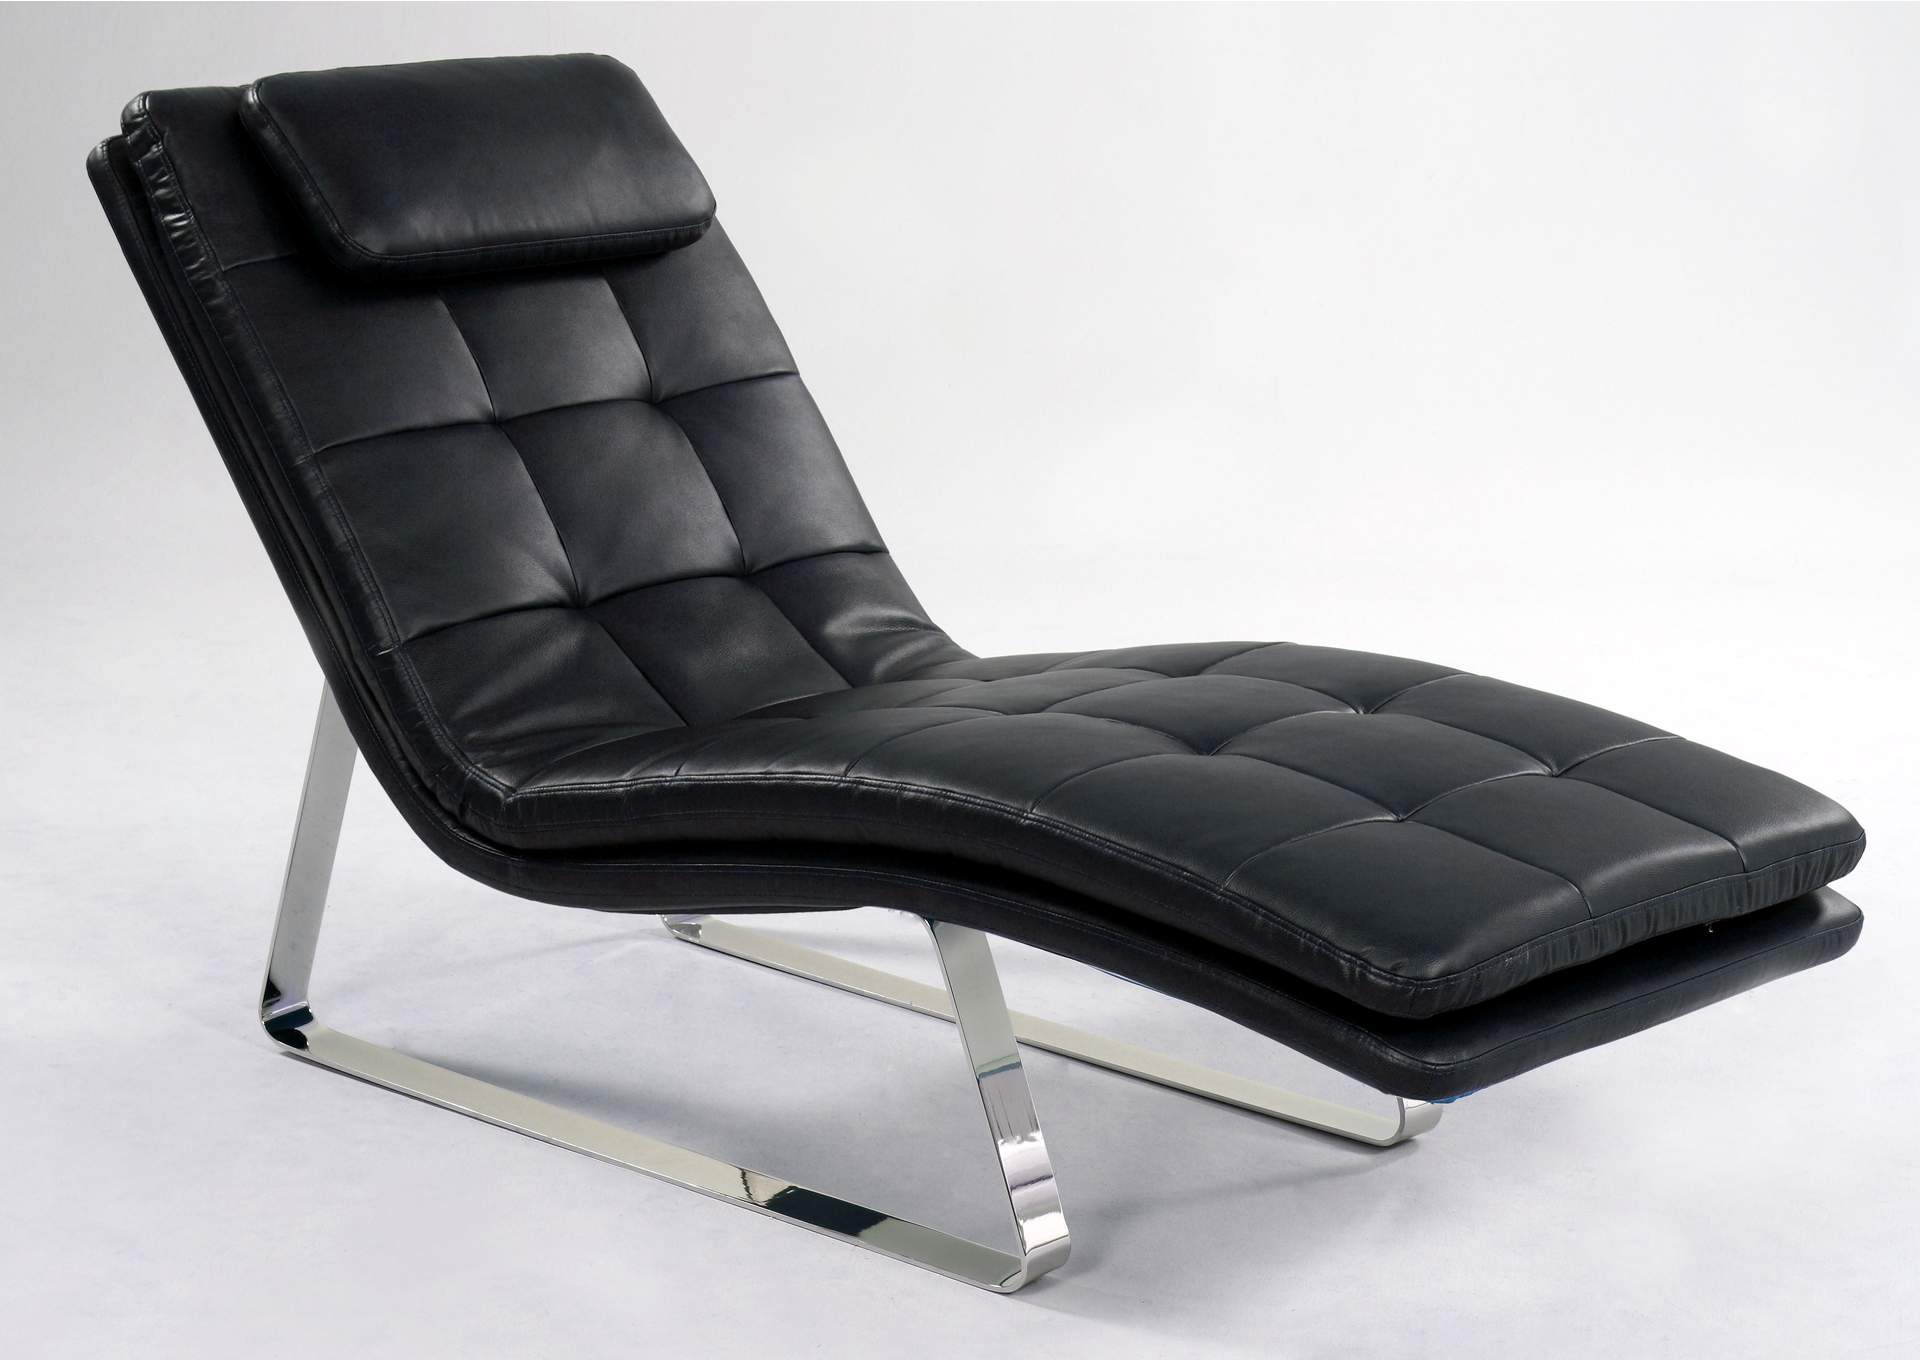 Corvette Contemporary Lounge Chair w/ Chrome Legs,Chintaly Imports